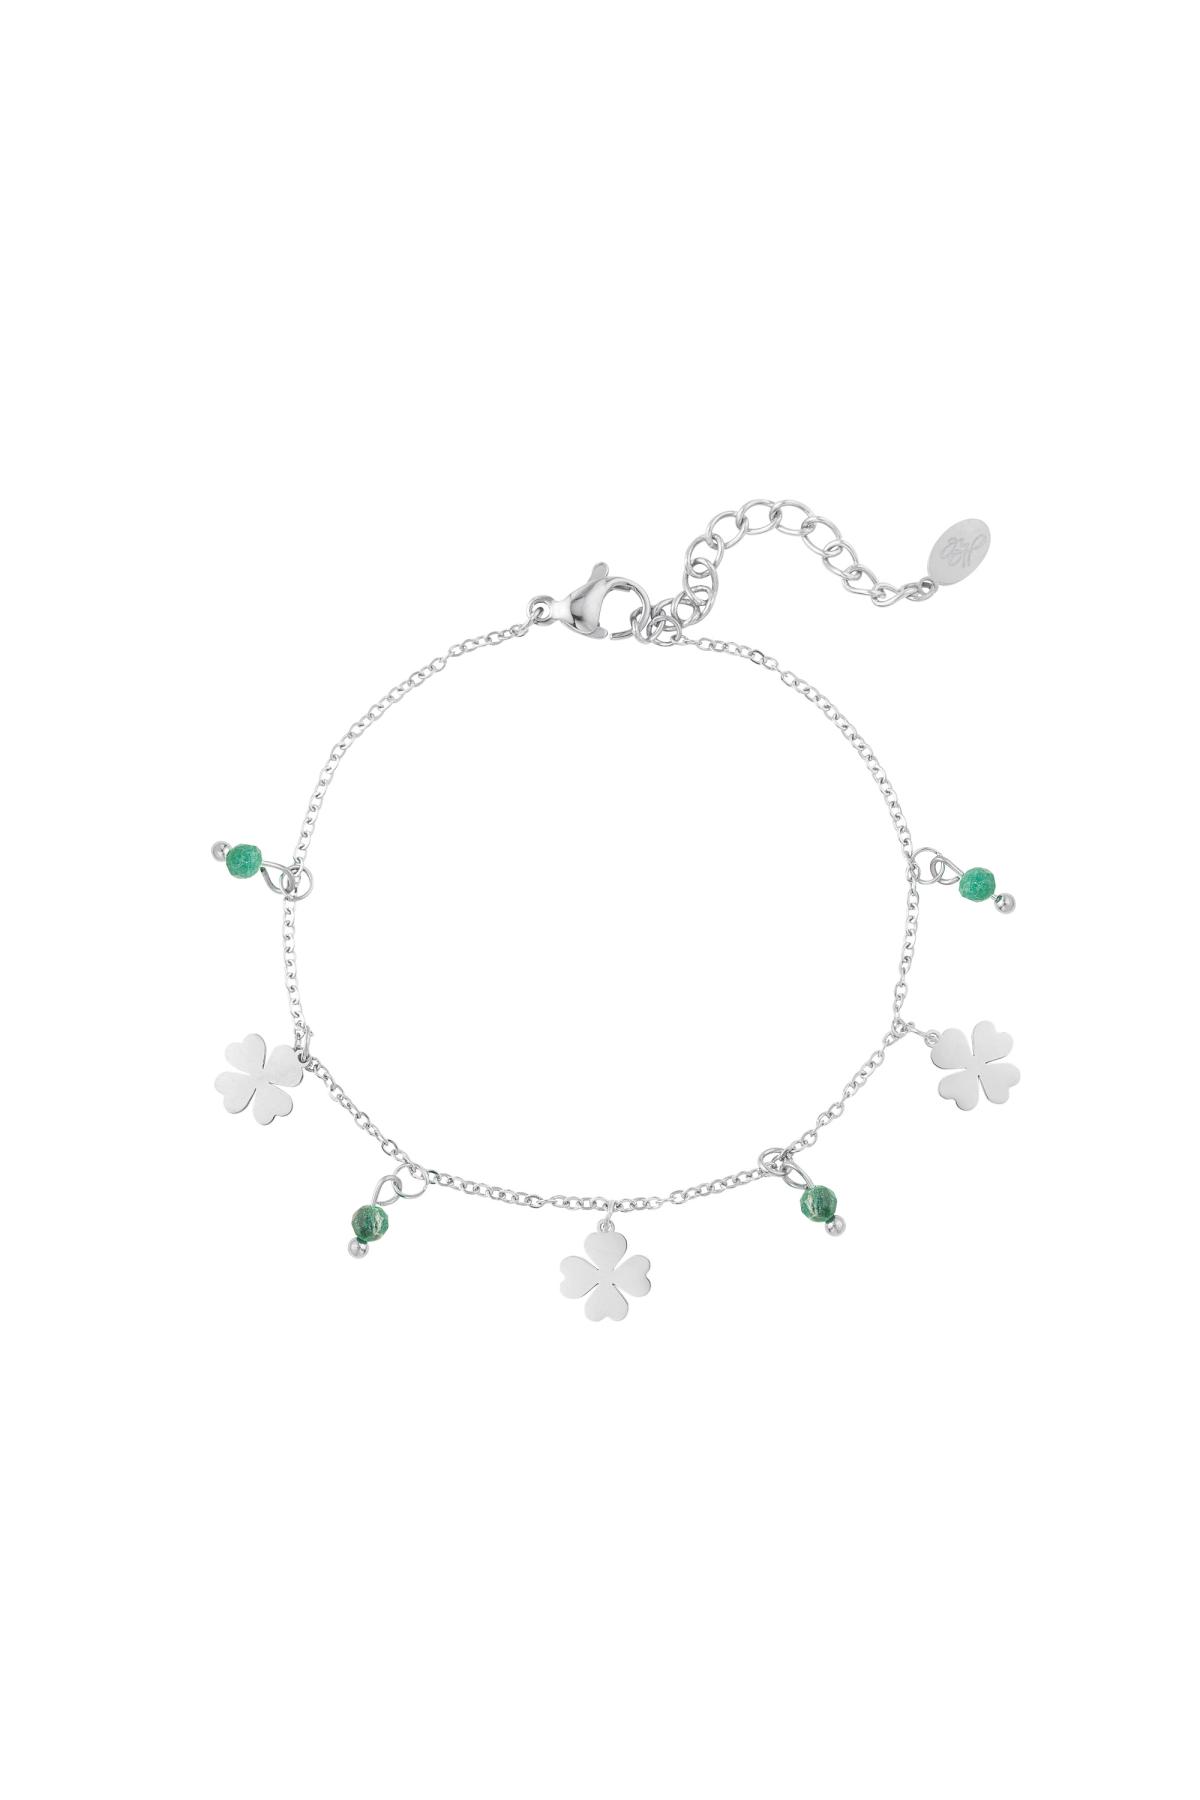 Bracelet four-leaf clovers & stones Silver Stainless Steel 